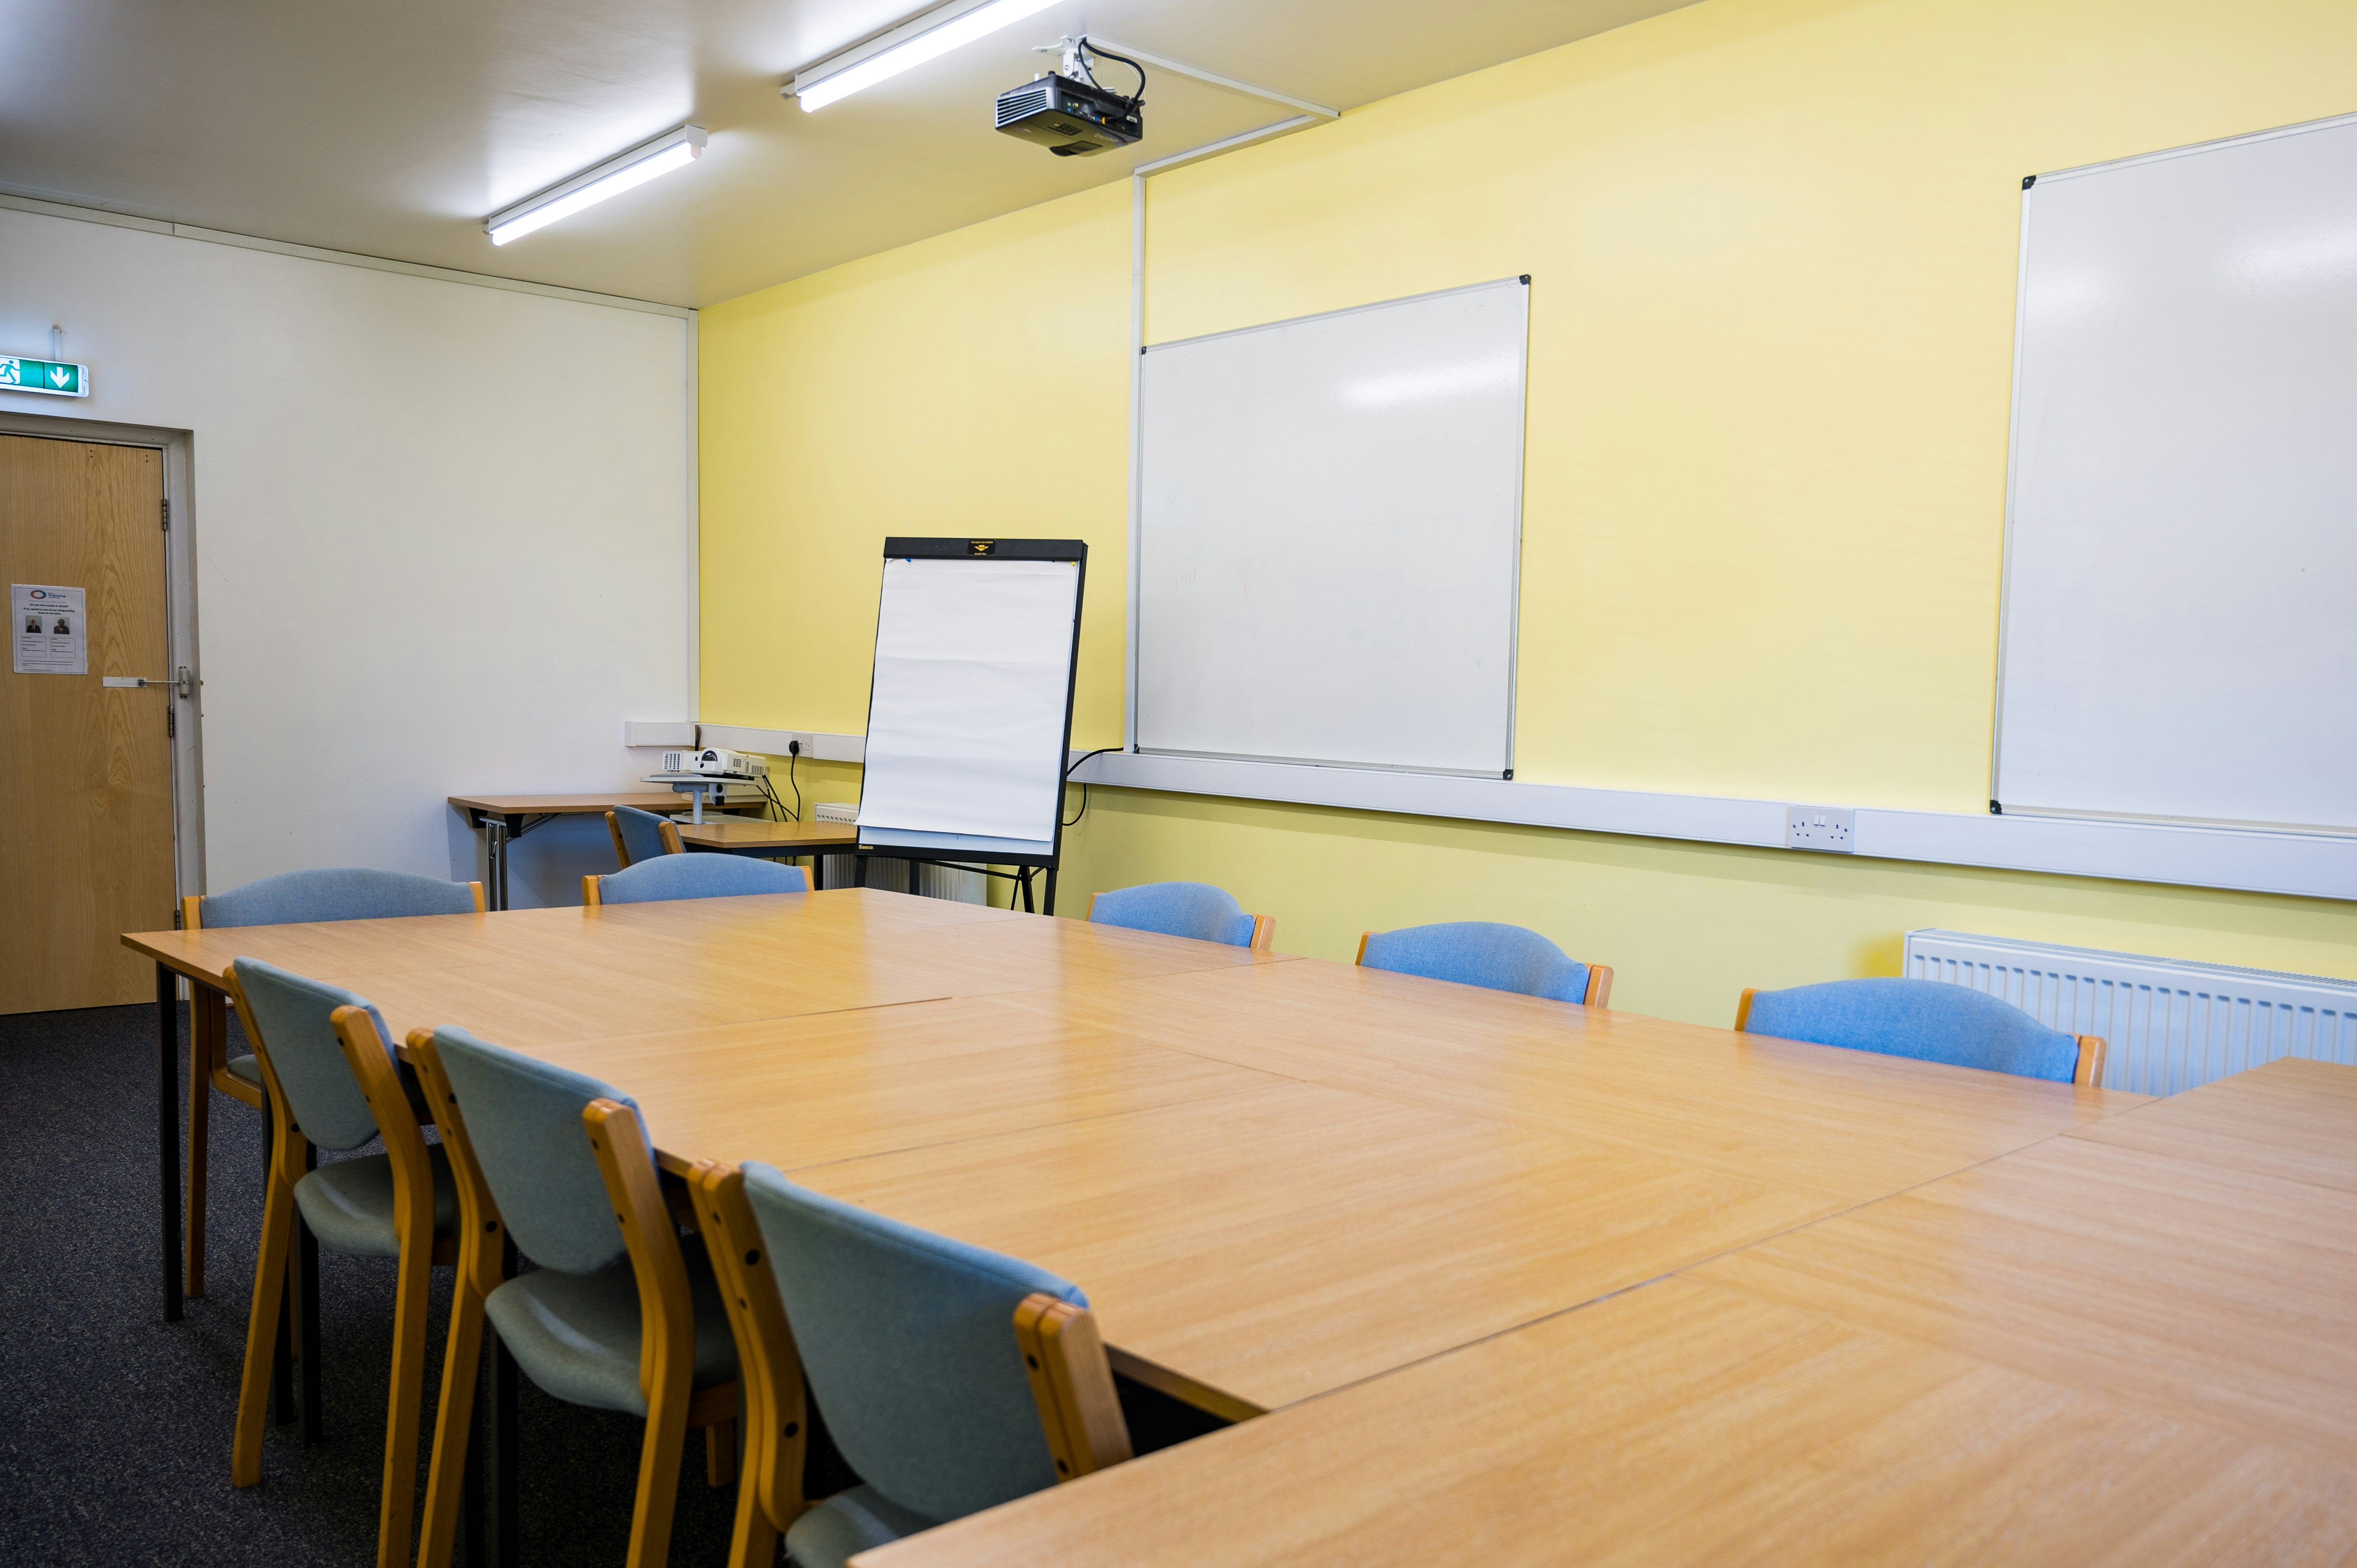 Wesley House, Salford, Manchester - Training Room 1 image 3